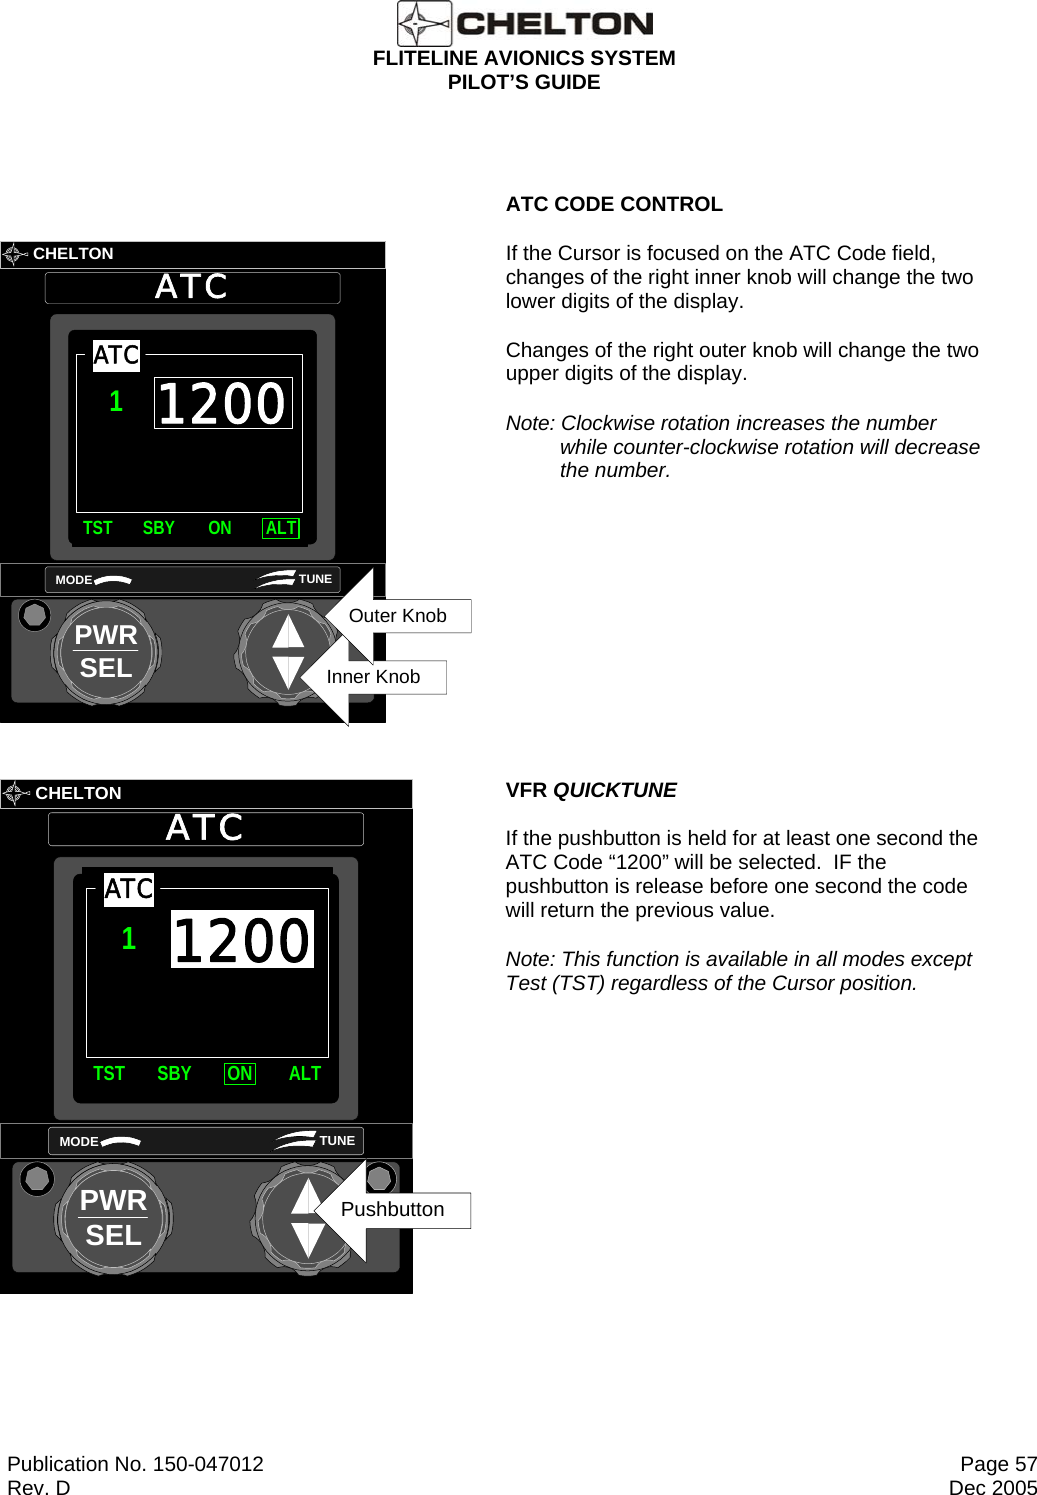  FLITELINE AVIONICS SYSTEM PILOT’S GUIDE  Publication No. 150-047012  Page 57 Rev. D  Dec 2005           CHELTONATCPWRSELMODE TUNEInner KnobOuter Knob1200TST SBY ON ALTATC1  ATC CODE CONTROL If the Cursor is focused on the ATC Code field, changes of the right inner knob will change the two lower digits of the display. Changes of the right outer knob will change the two upper digits of the display. Note: Clockwise rotation increases the number while counter-clockwise rotation will decrease the number.         CHELTONATCPWRSELMODE TUNEPushbuttonTST SBY ON ALTATC11200 VFR QUICKTUNE If the pushbutton is held for at least one second the ATC Code “1200” will be selected.  IF the pushbutton is release before one second the code will return the previous value. Note: This function is available in all modes except Test (TST) regardless of the Cursor position.  